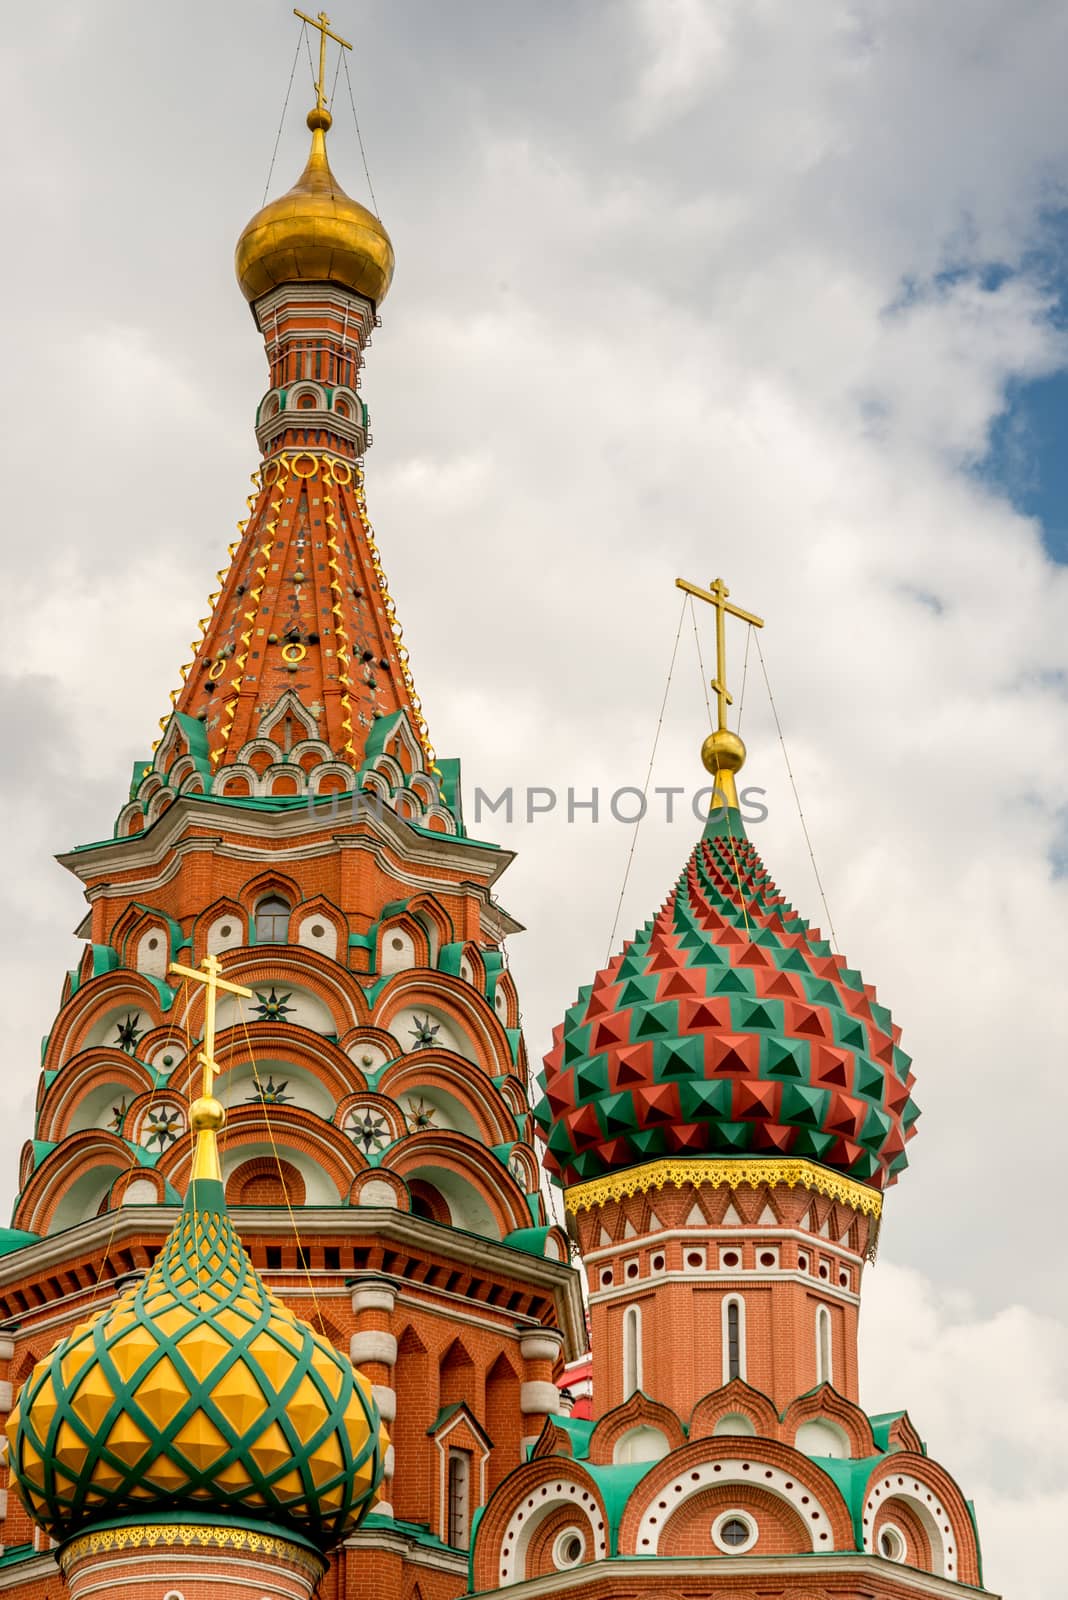 St Basil's Cathedral by pomemick